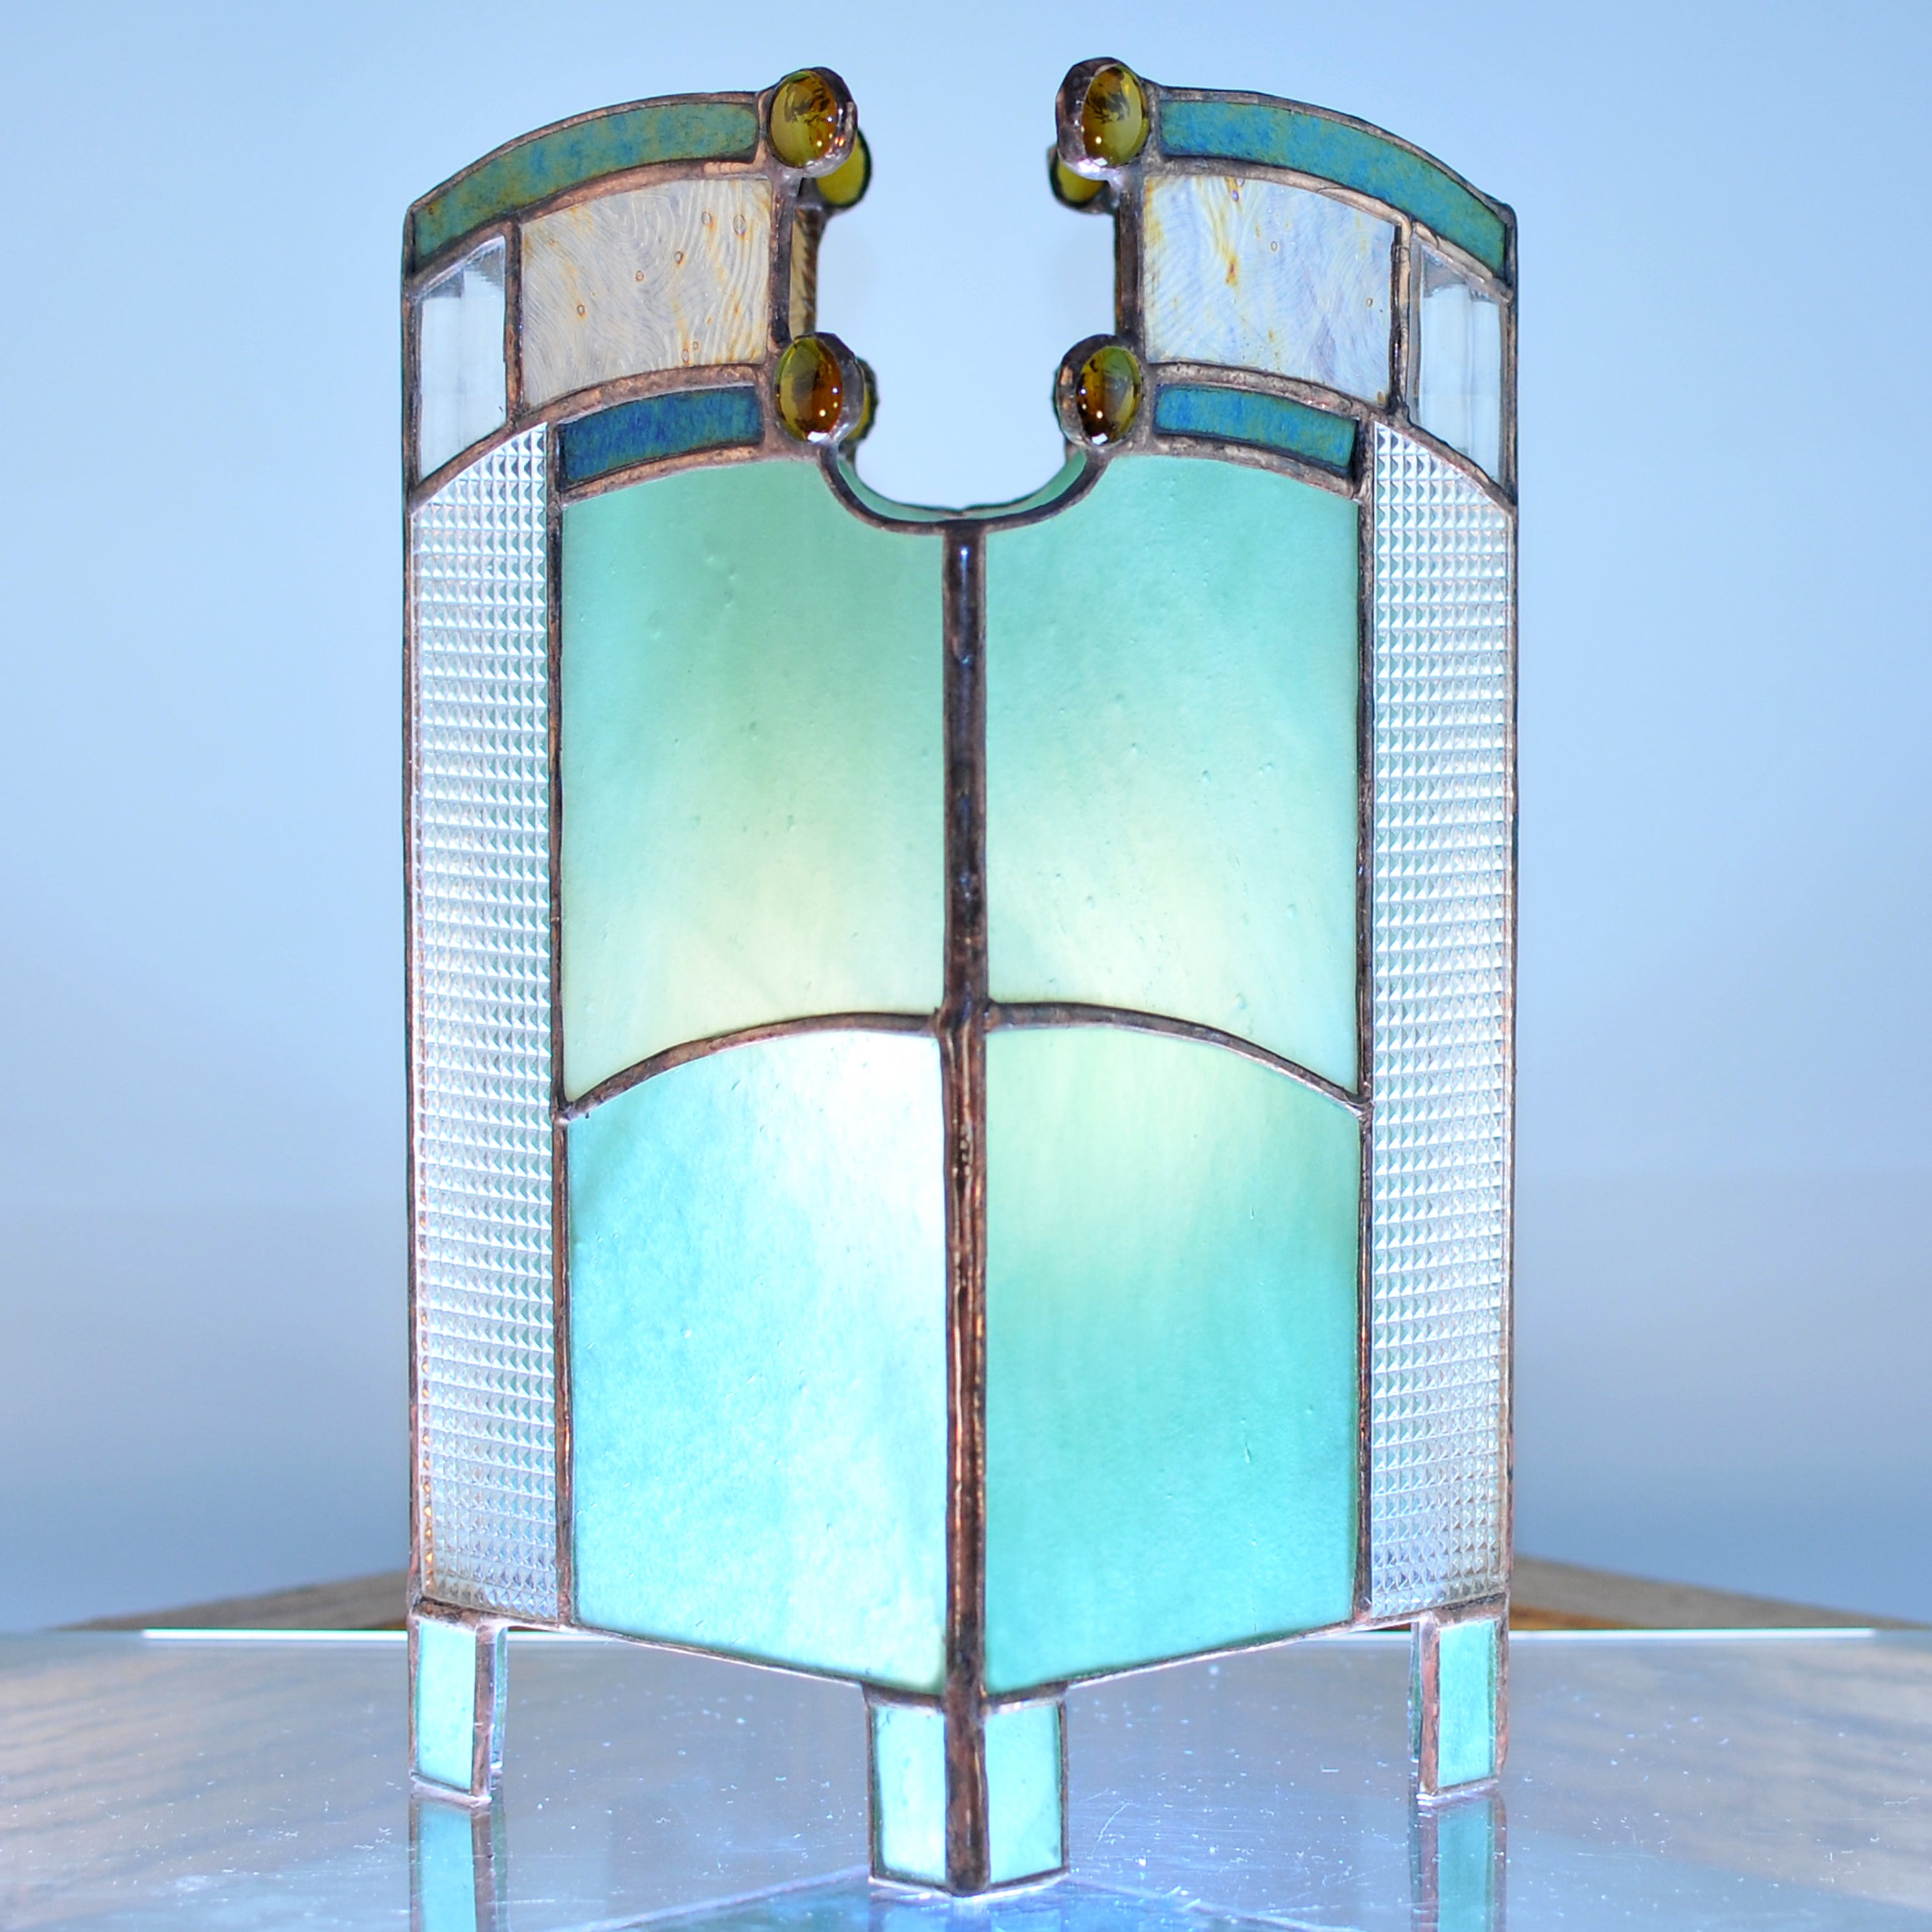 Small stained glass lamp/ lantern  with architectural lines. Mission style / Prairie style.